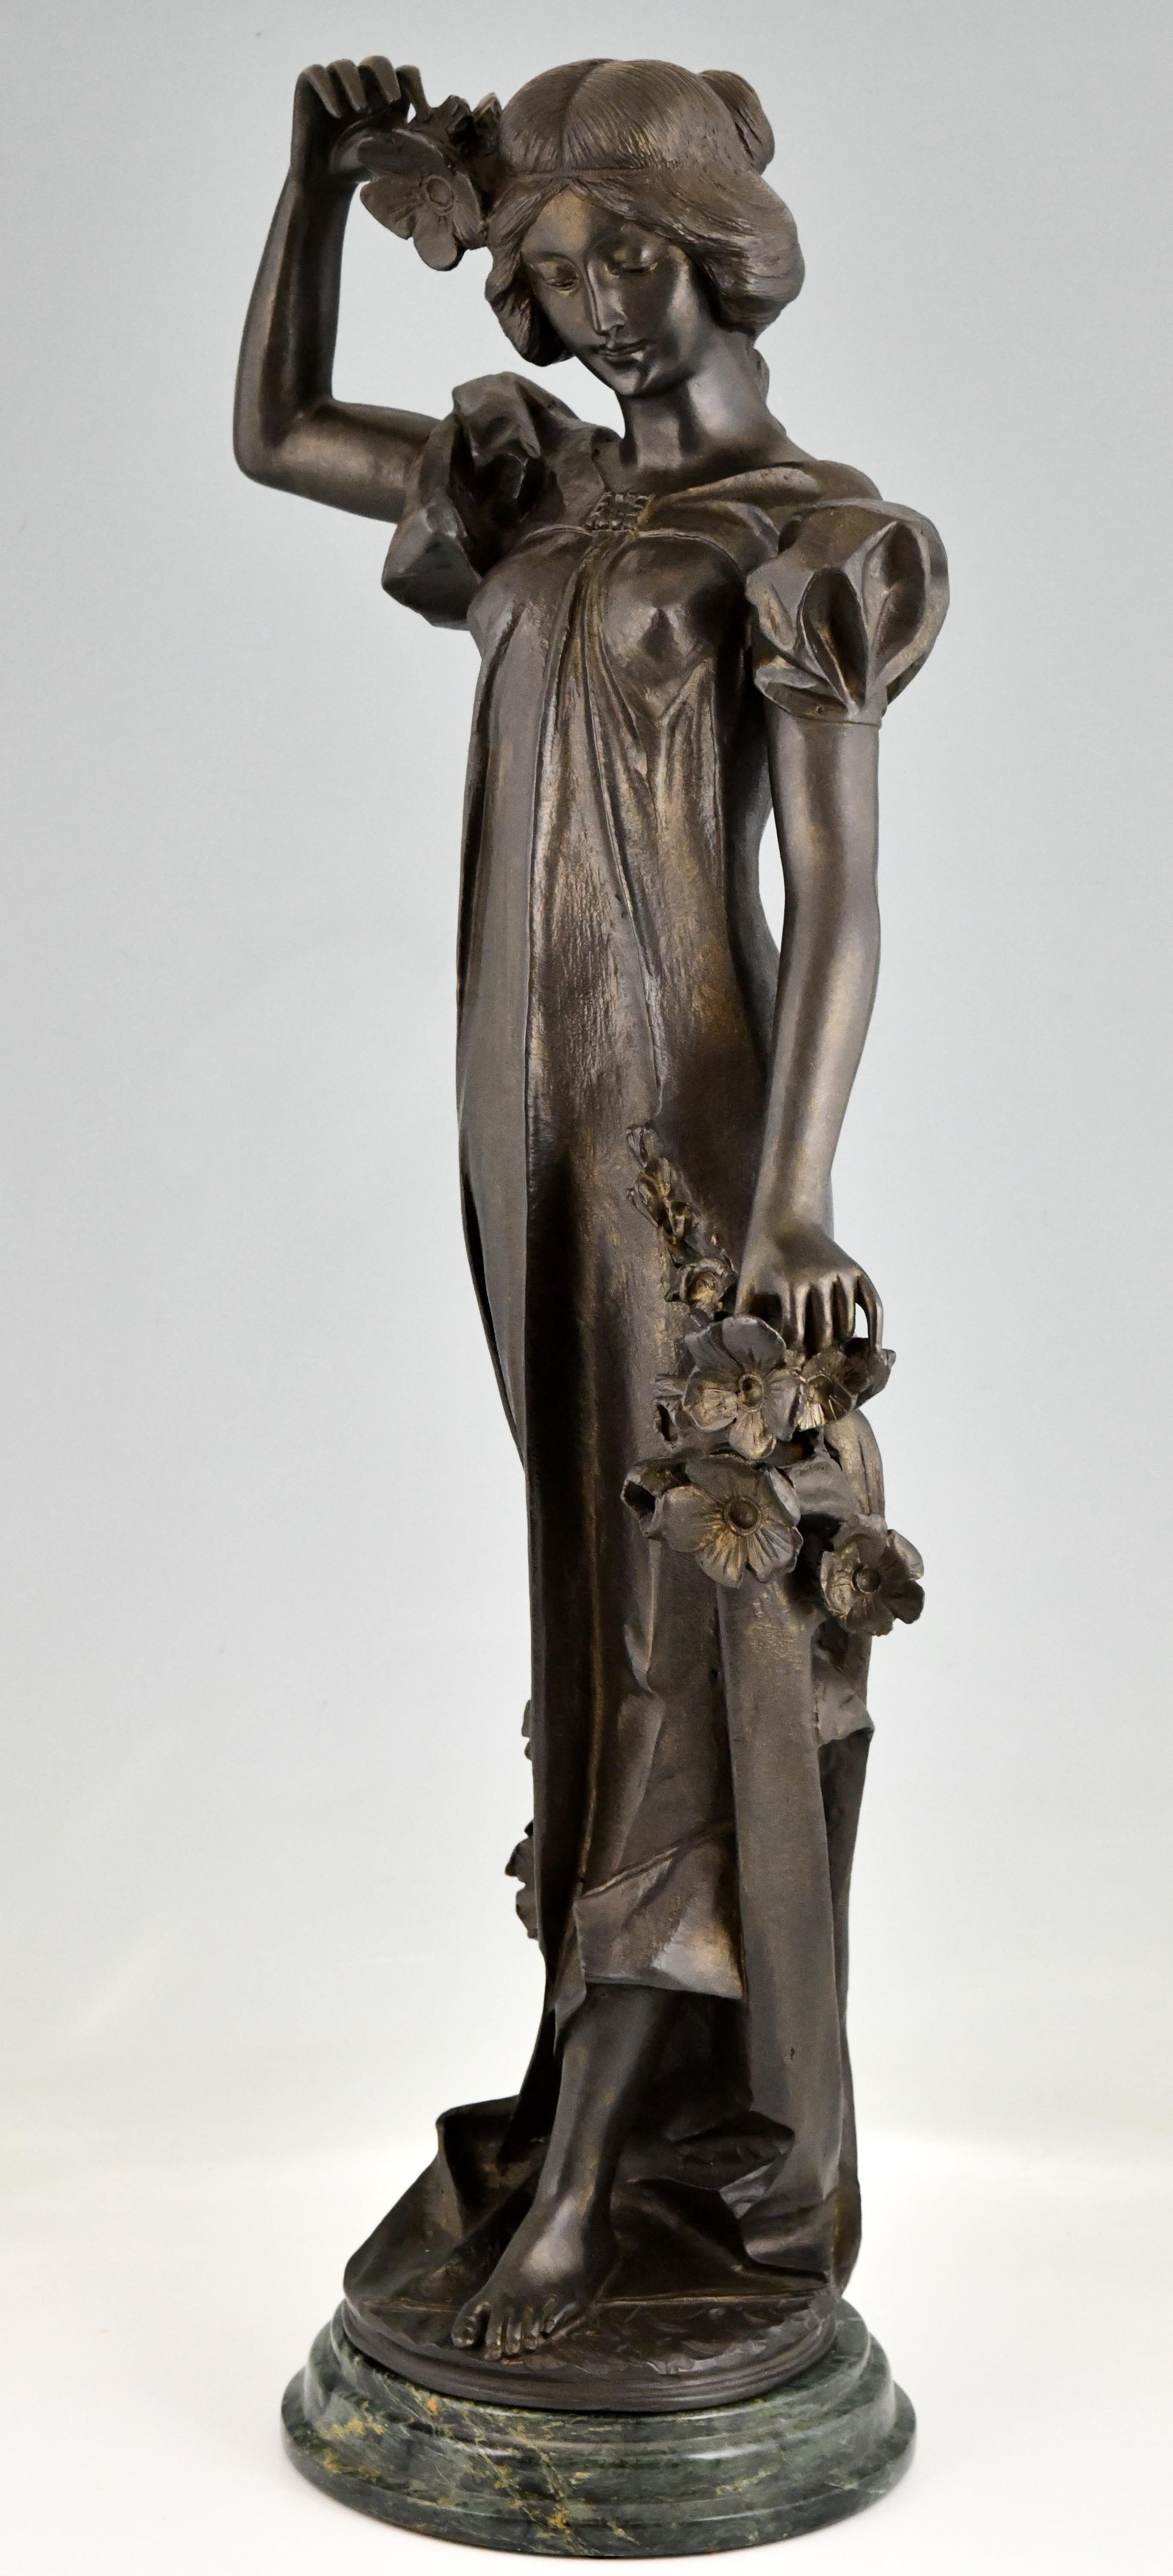 French Art Nouveau bronze sculpture lady with poppies signed by Adolpho Cipriani